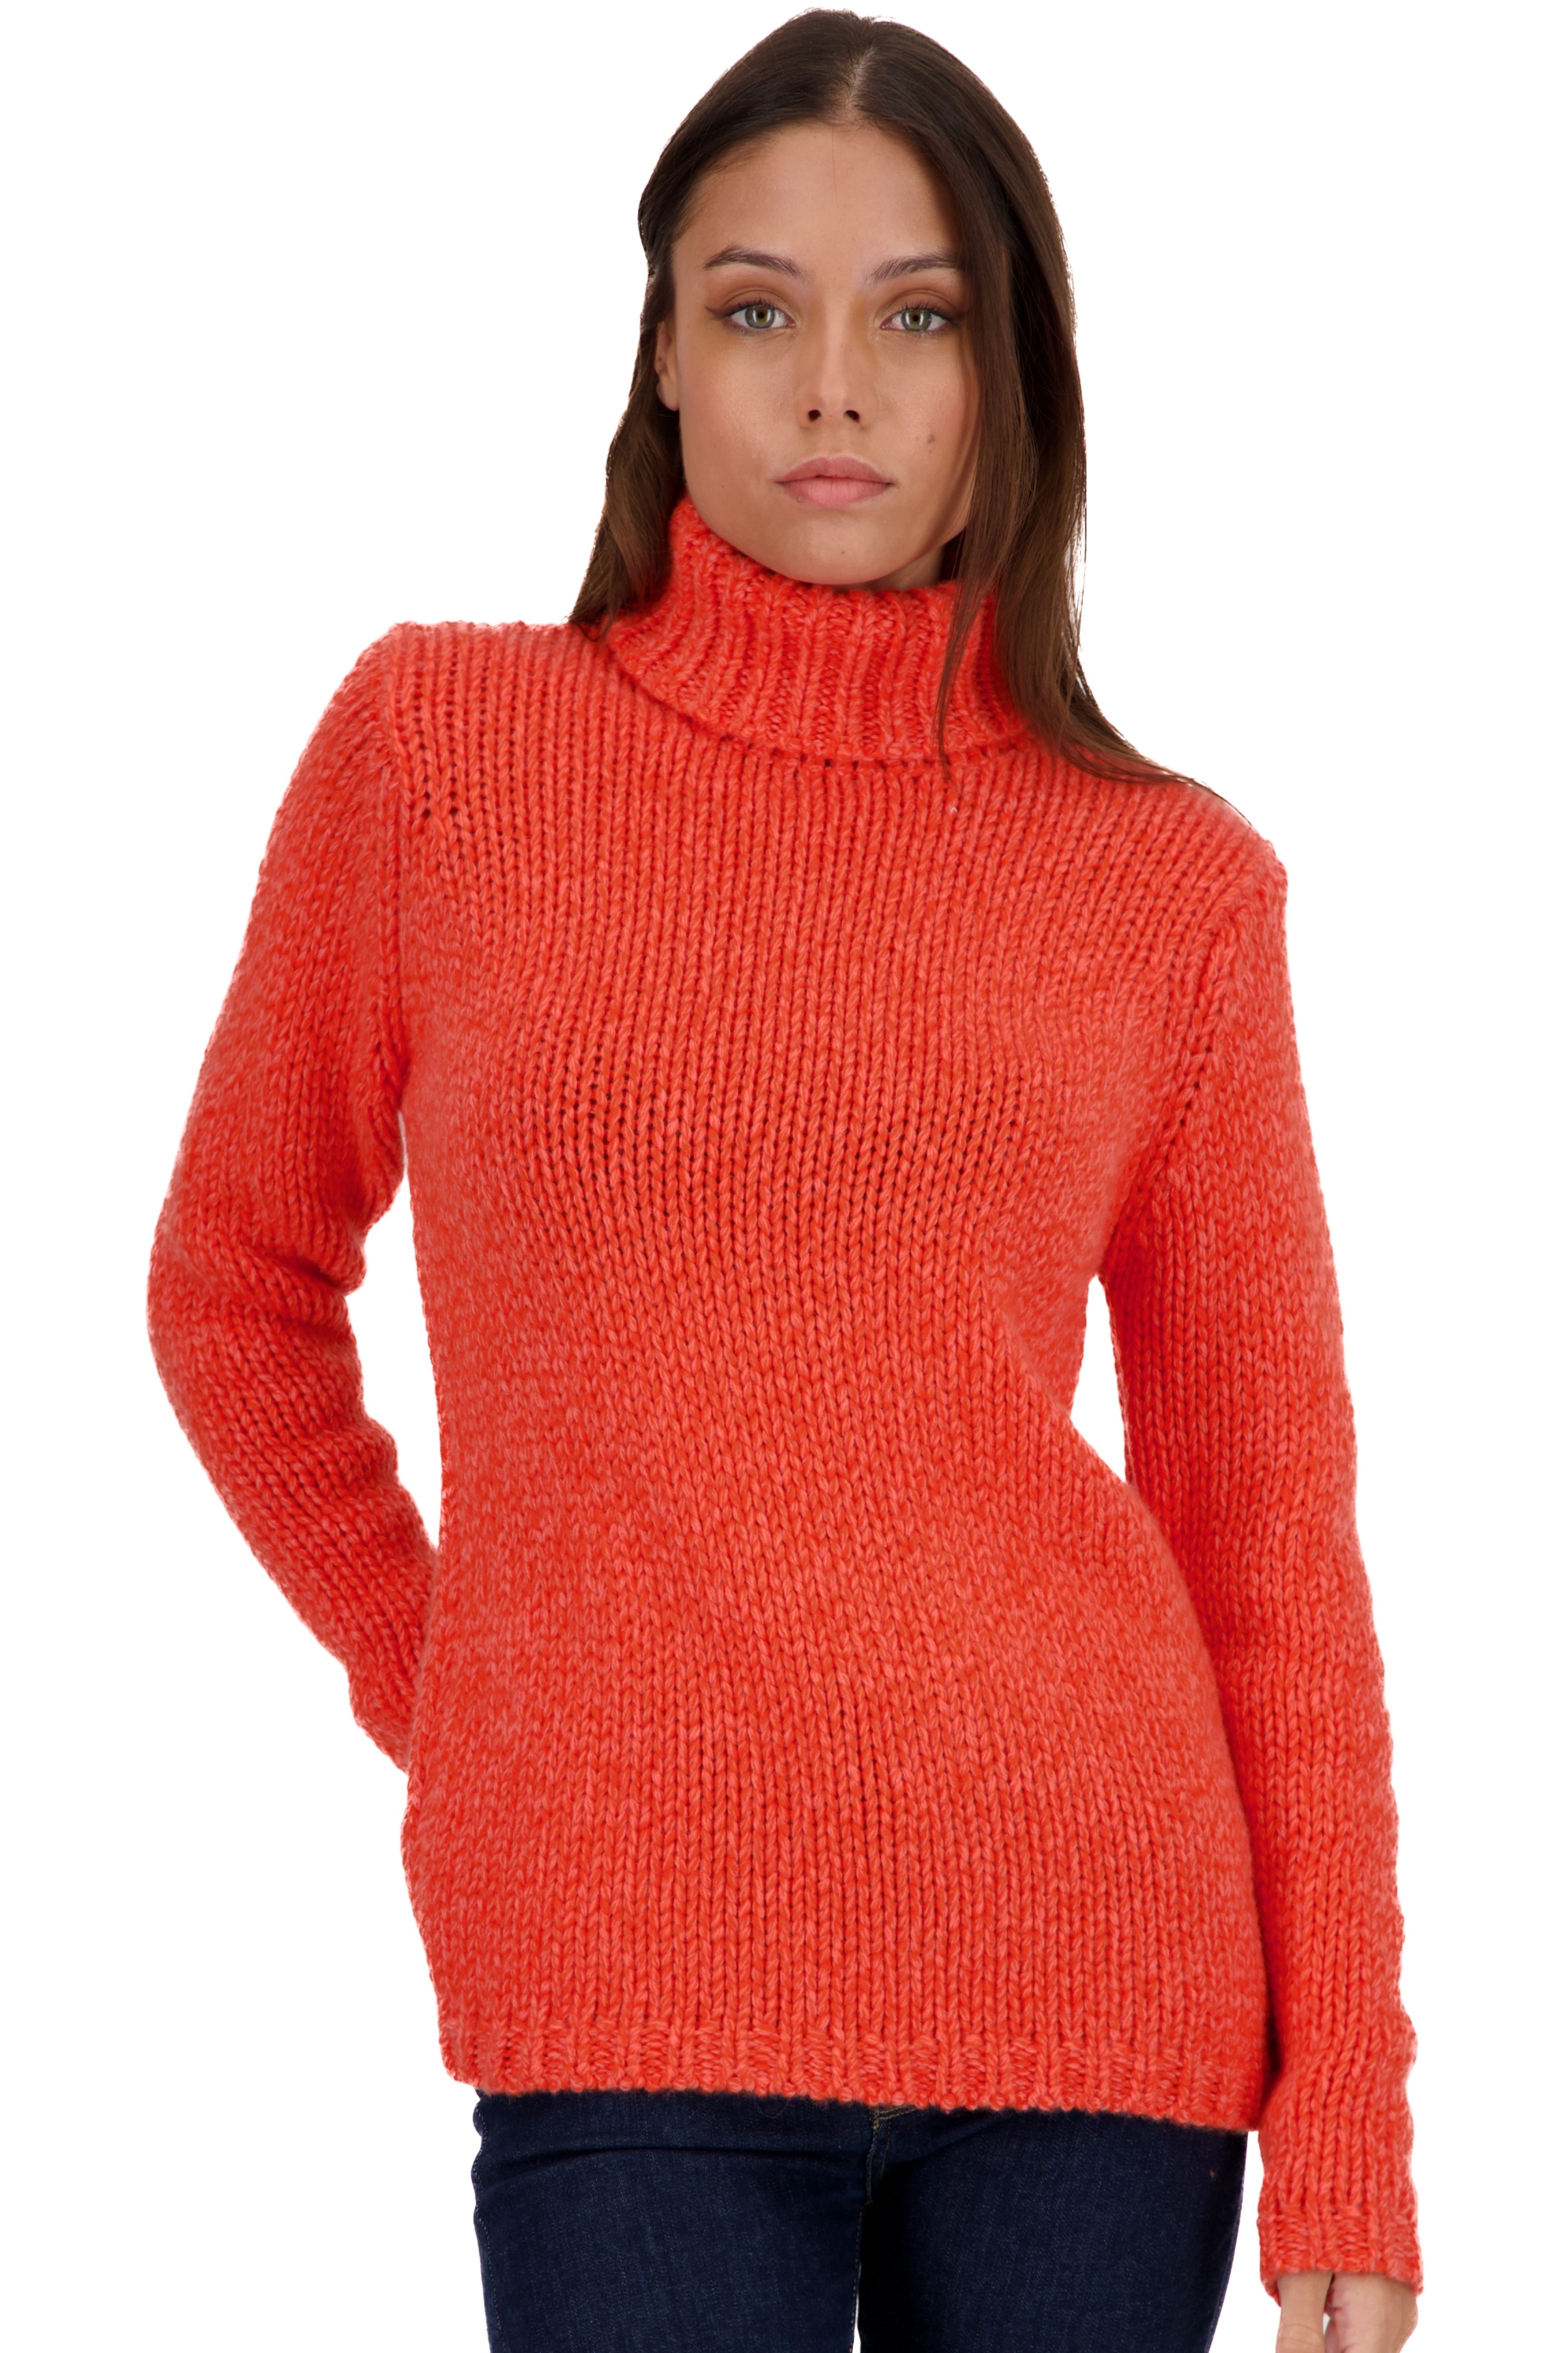 Cachemire pull femme col roule vicenza peach bloody orange s